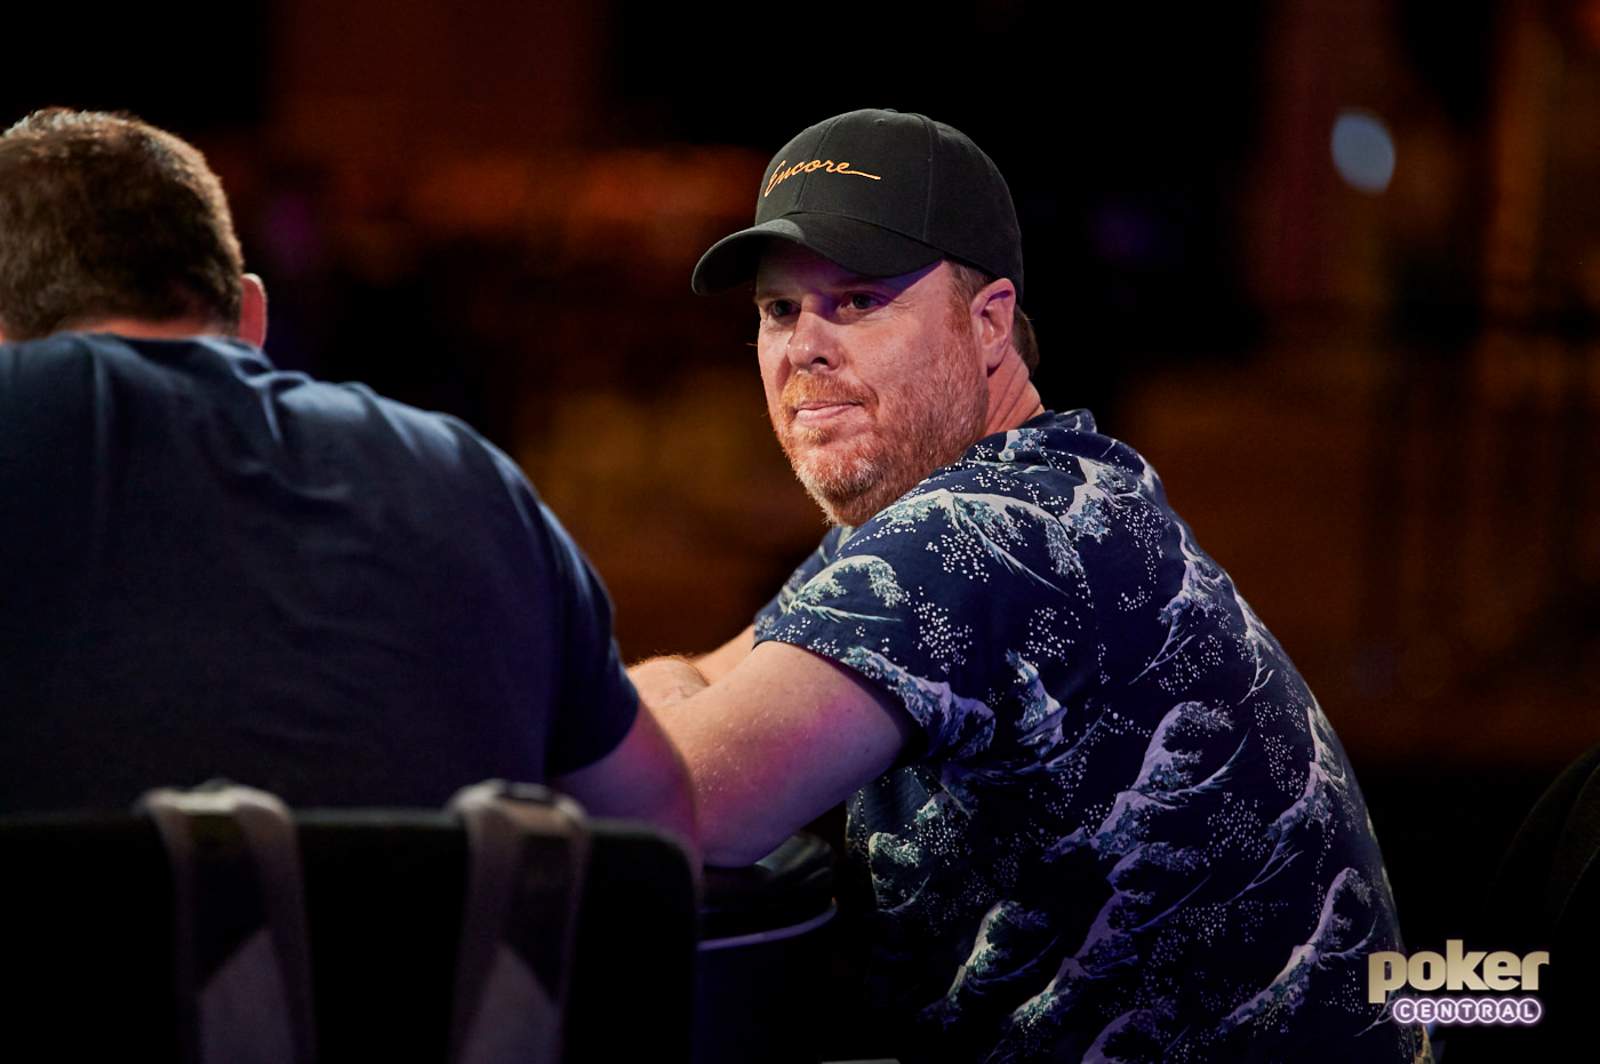 Hollywood Music Composer Pedro Bromfman Shares His Passion for Poker